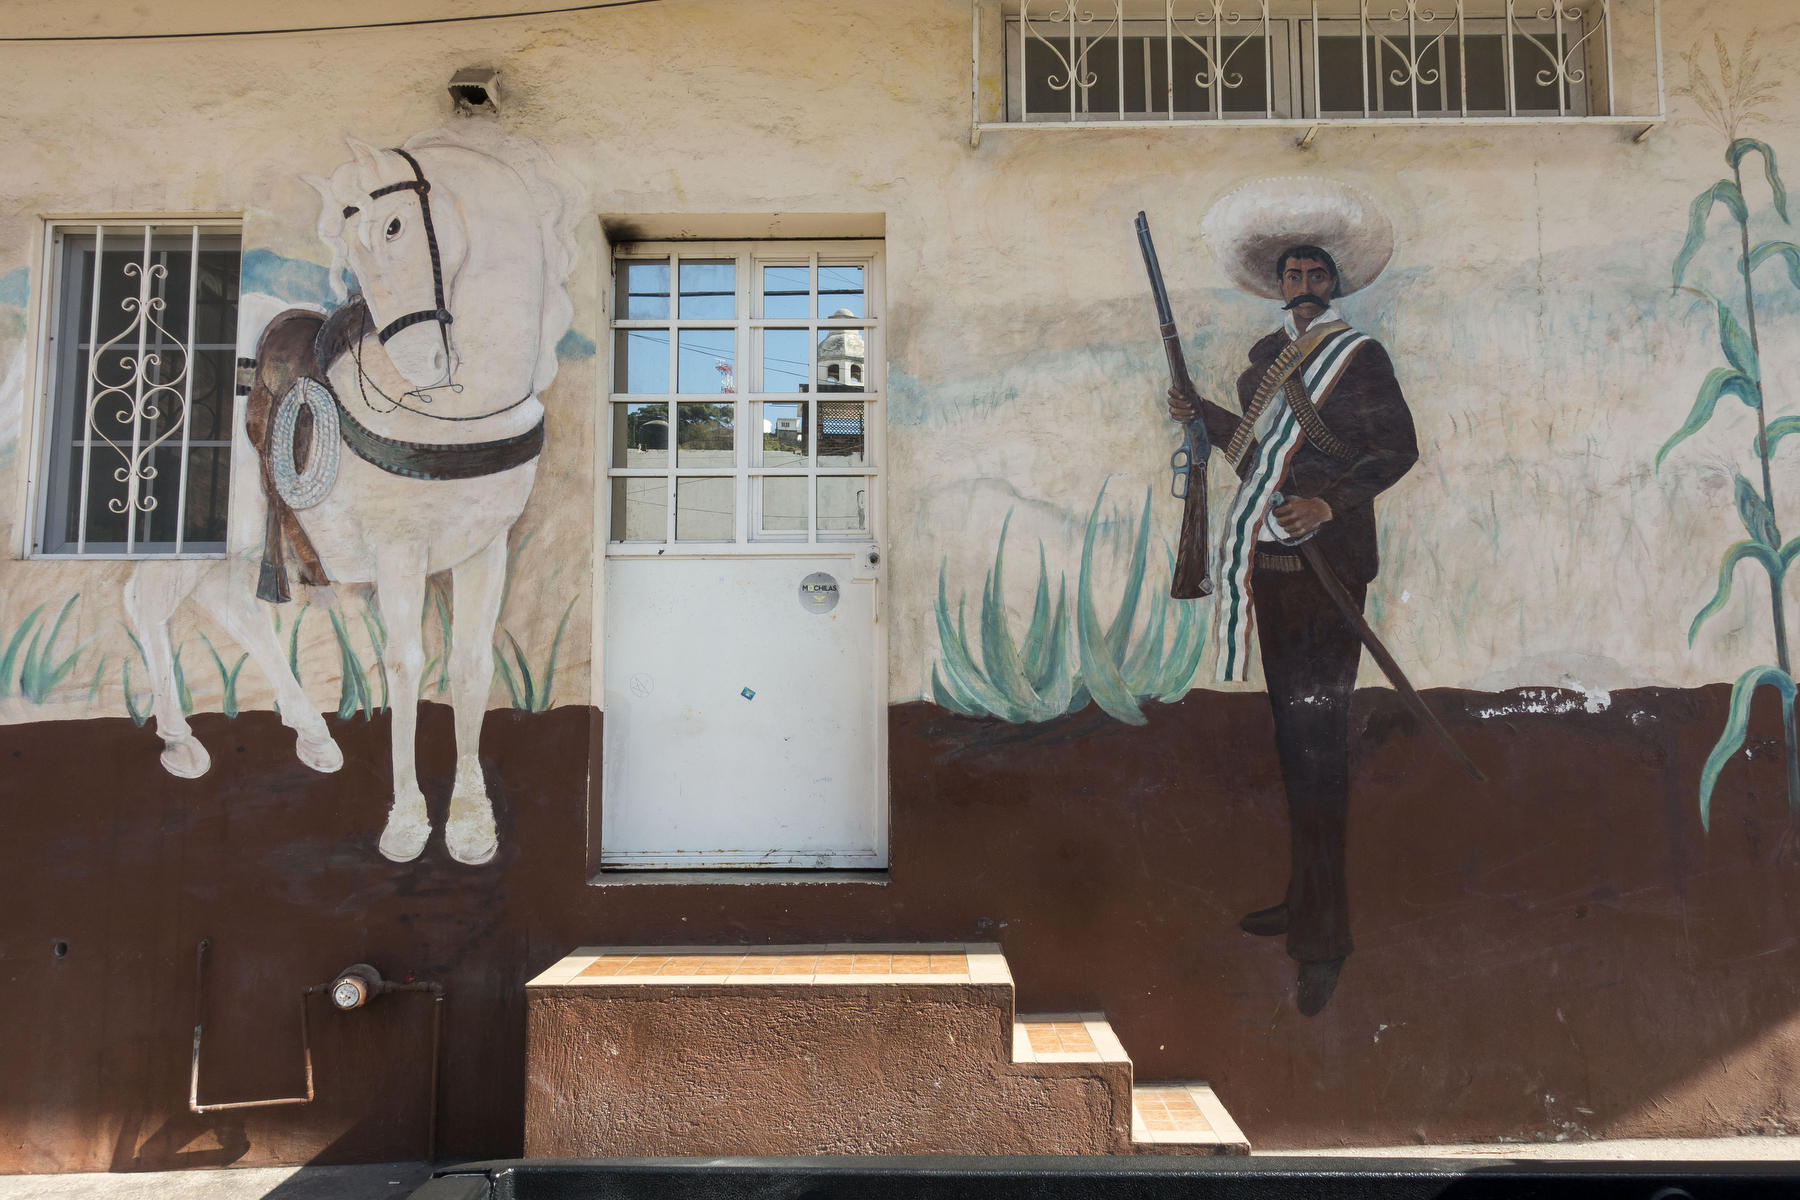 General Pancho Villa and his horse Seven Leagues painted on the side of a house in Old Town. : PUERTO VALLARTA - Wall Art & Bicycle Tour : Viviane Moos |  Documentary Photographer